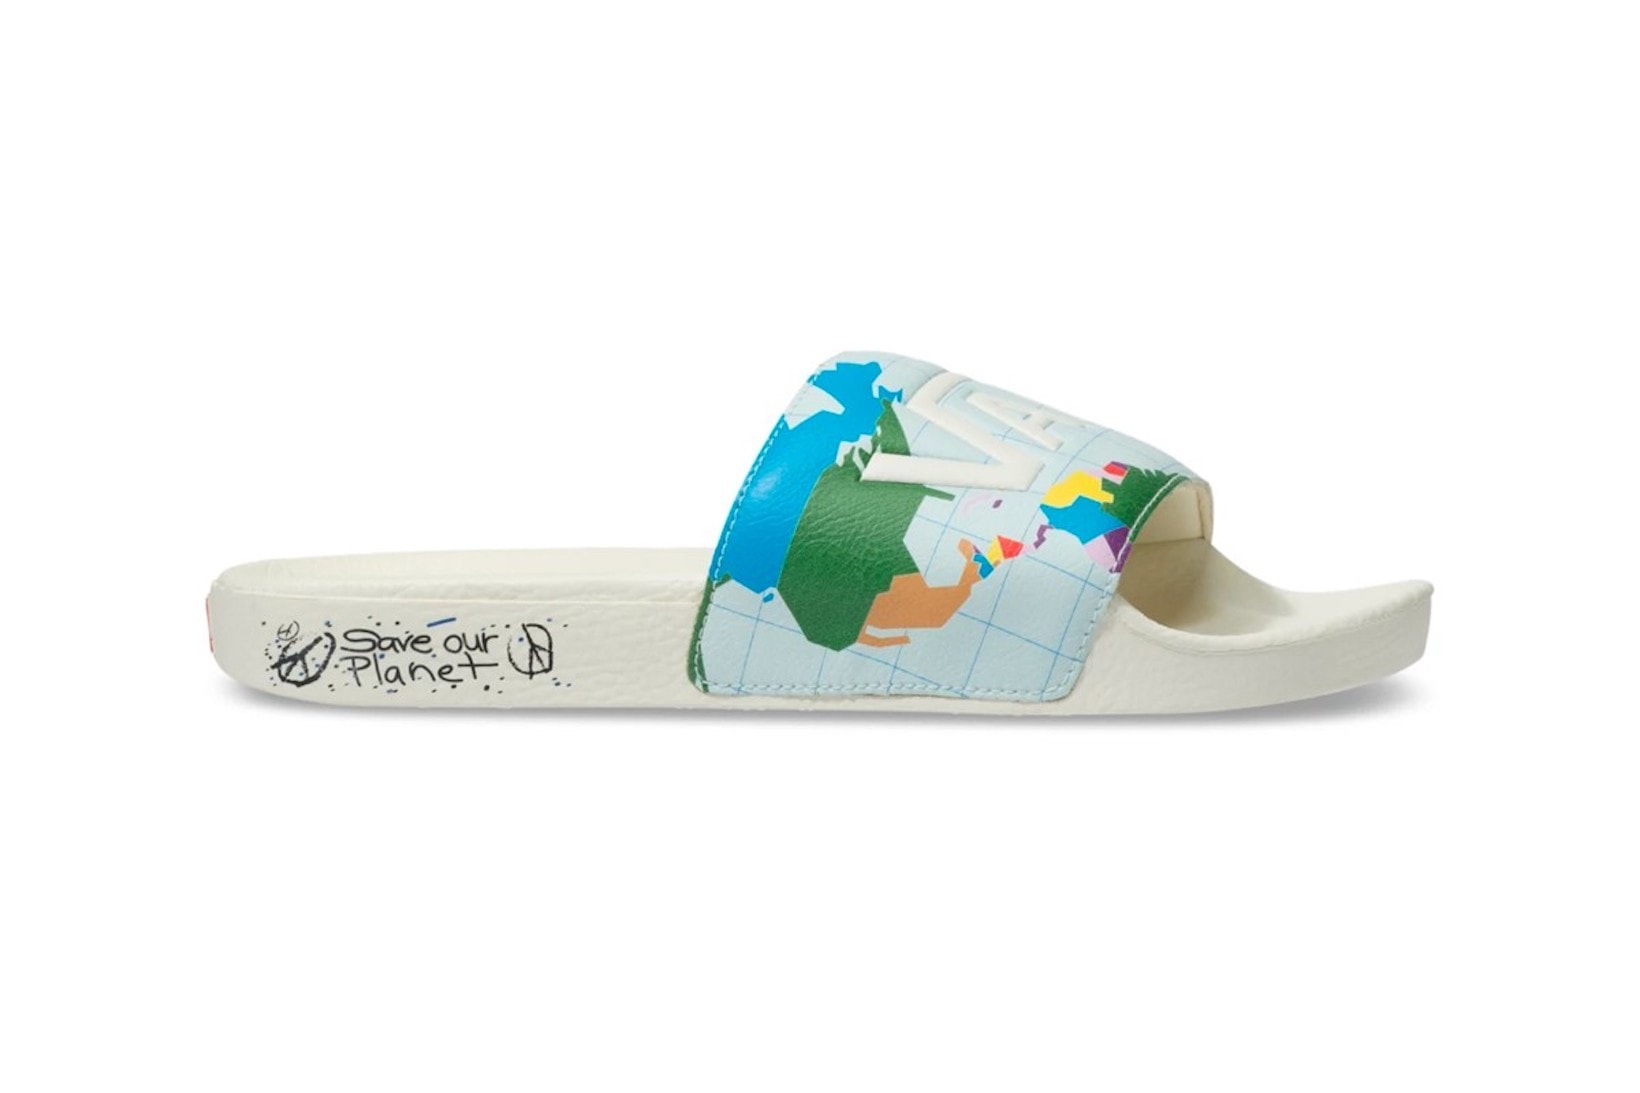 vans save our planet collection slideon slippers sneakers sustainability shoes footwear white